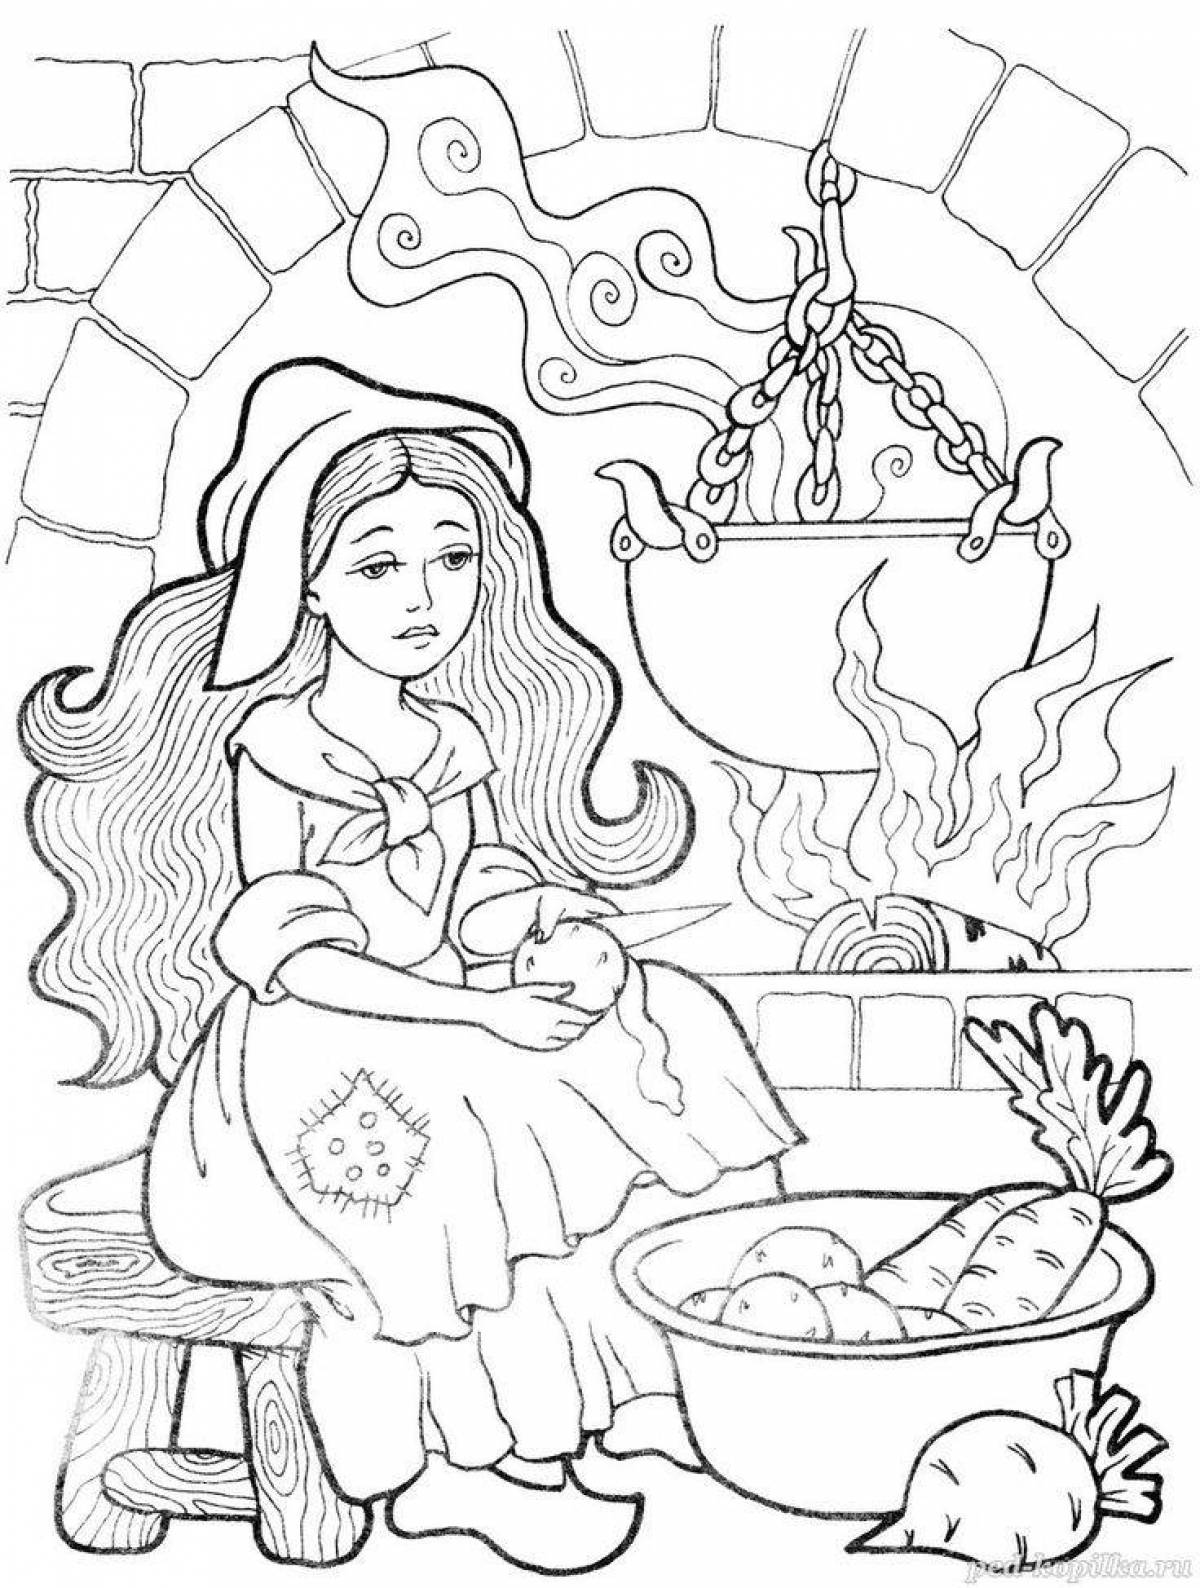 Charles Perrault's fascinating coloring pages